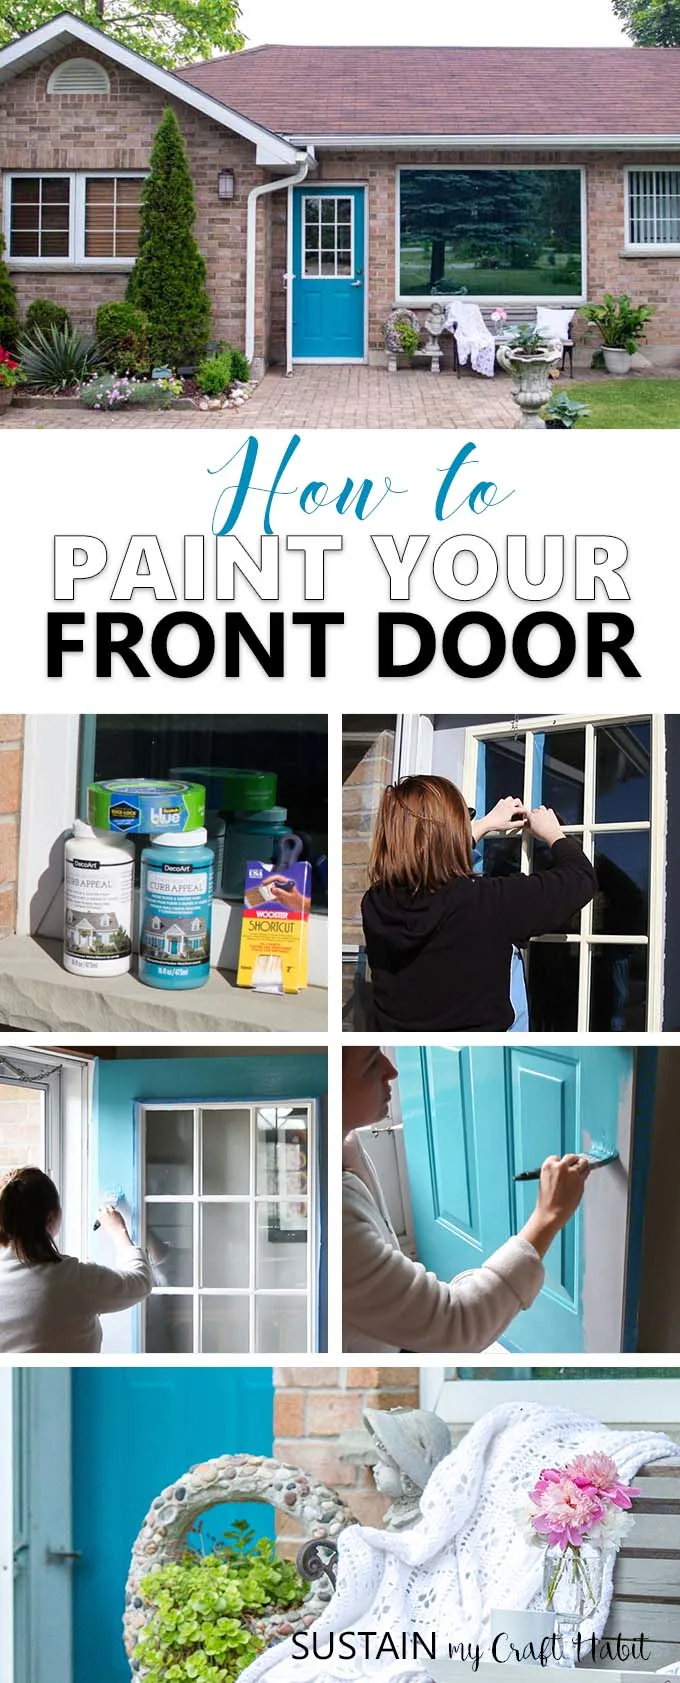 Learn how to paint a front door in 3 easy steps! A simple DIY project to add curb appeal to your home. Full, step-by-step tutorial is included.